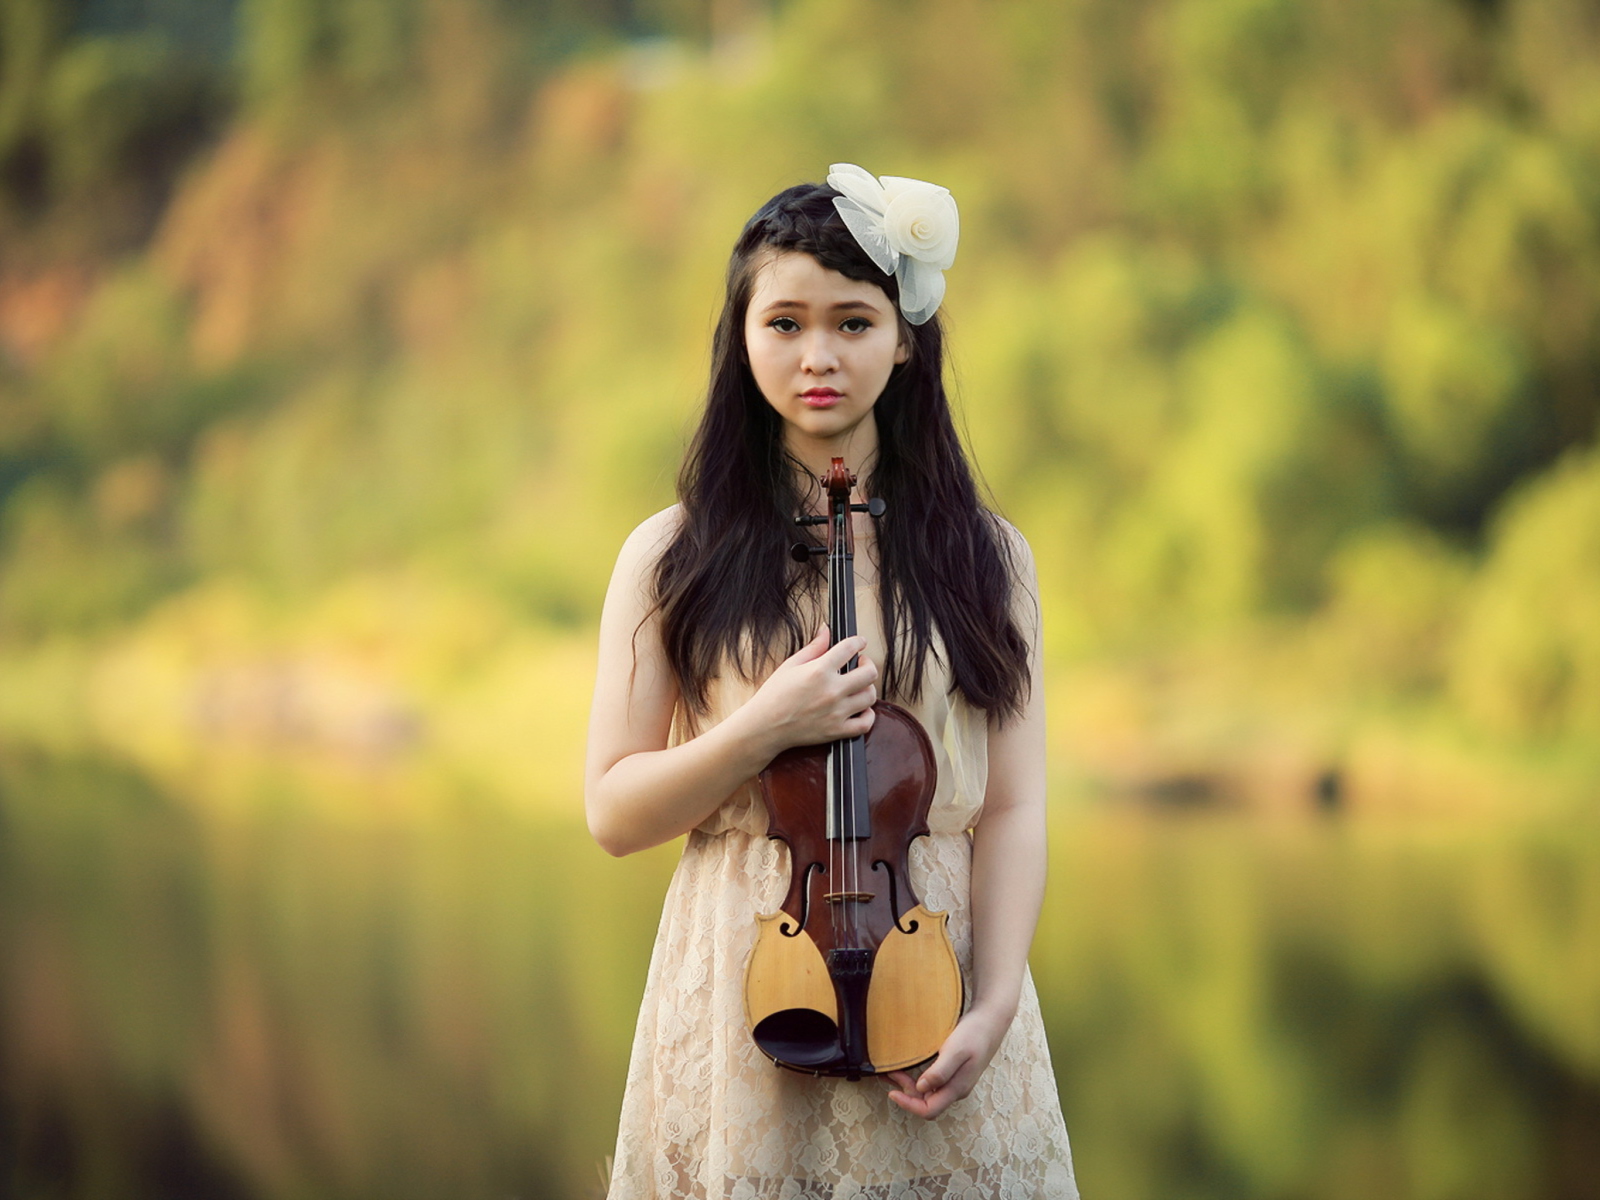 Girl With Violin wallpaper 1600x1200